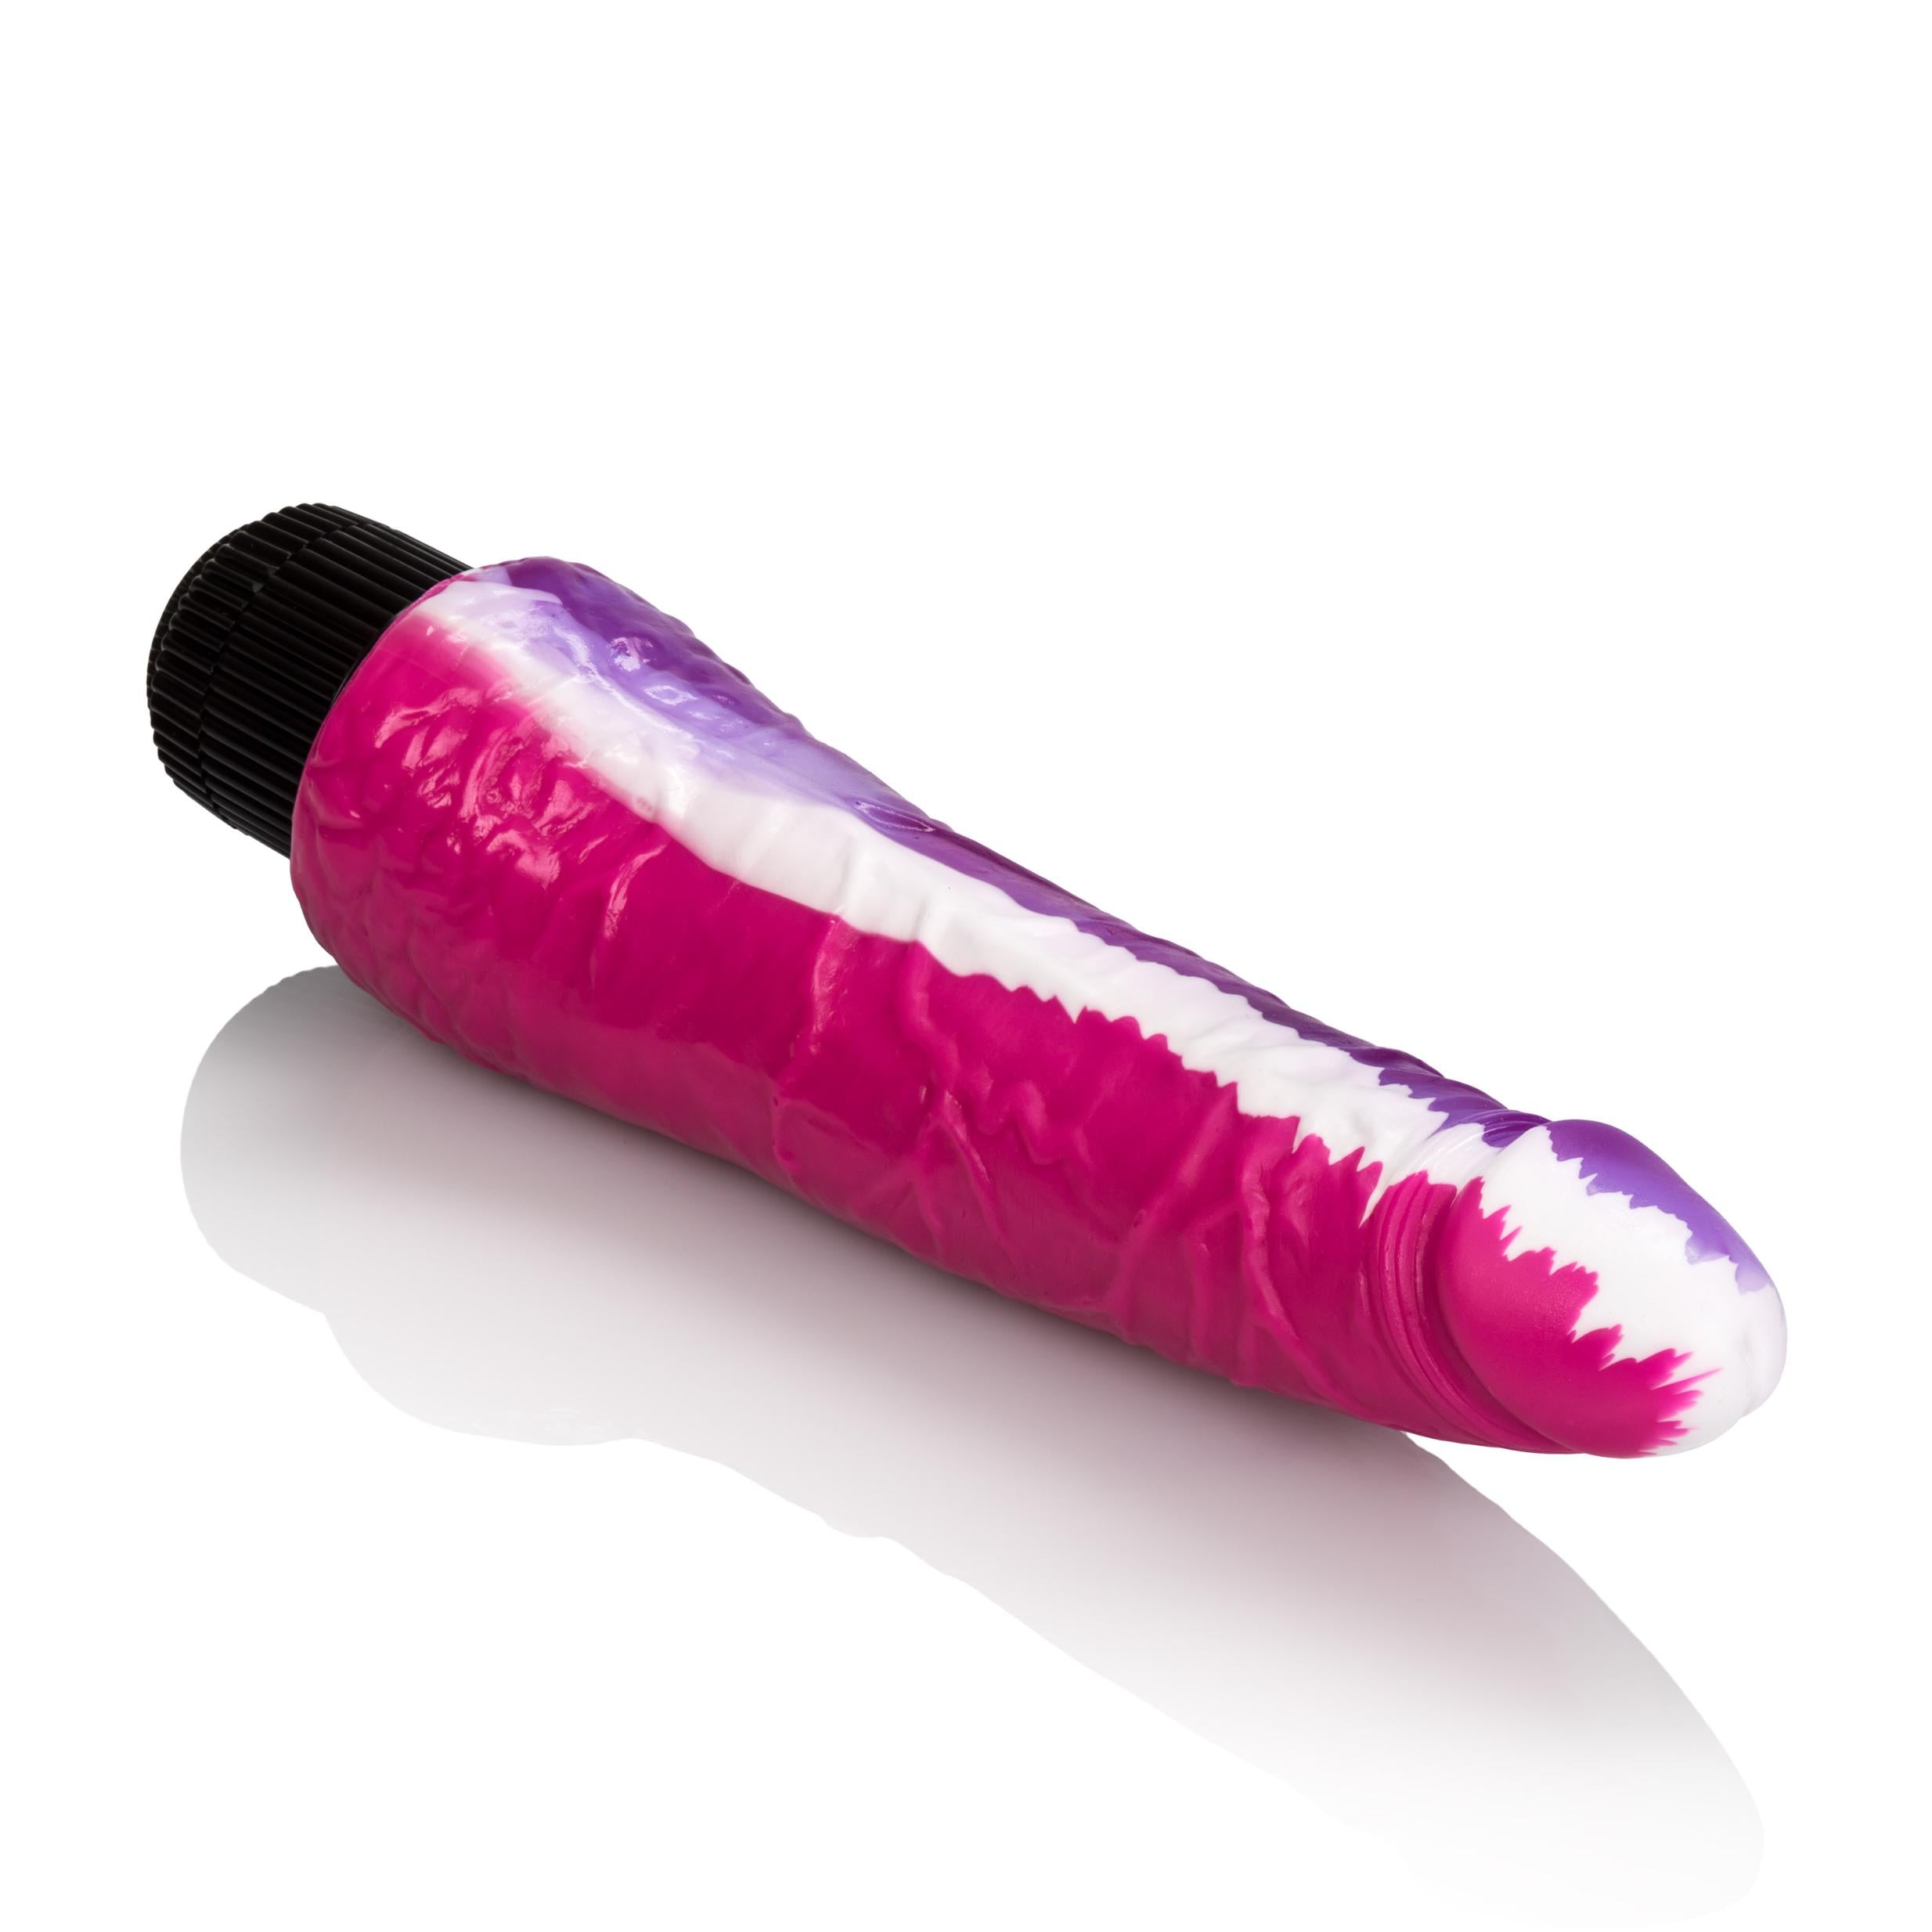 Funky Jelly Vibrator 7.5 Inches - Pink/purple 7.5"